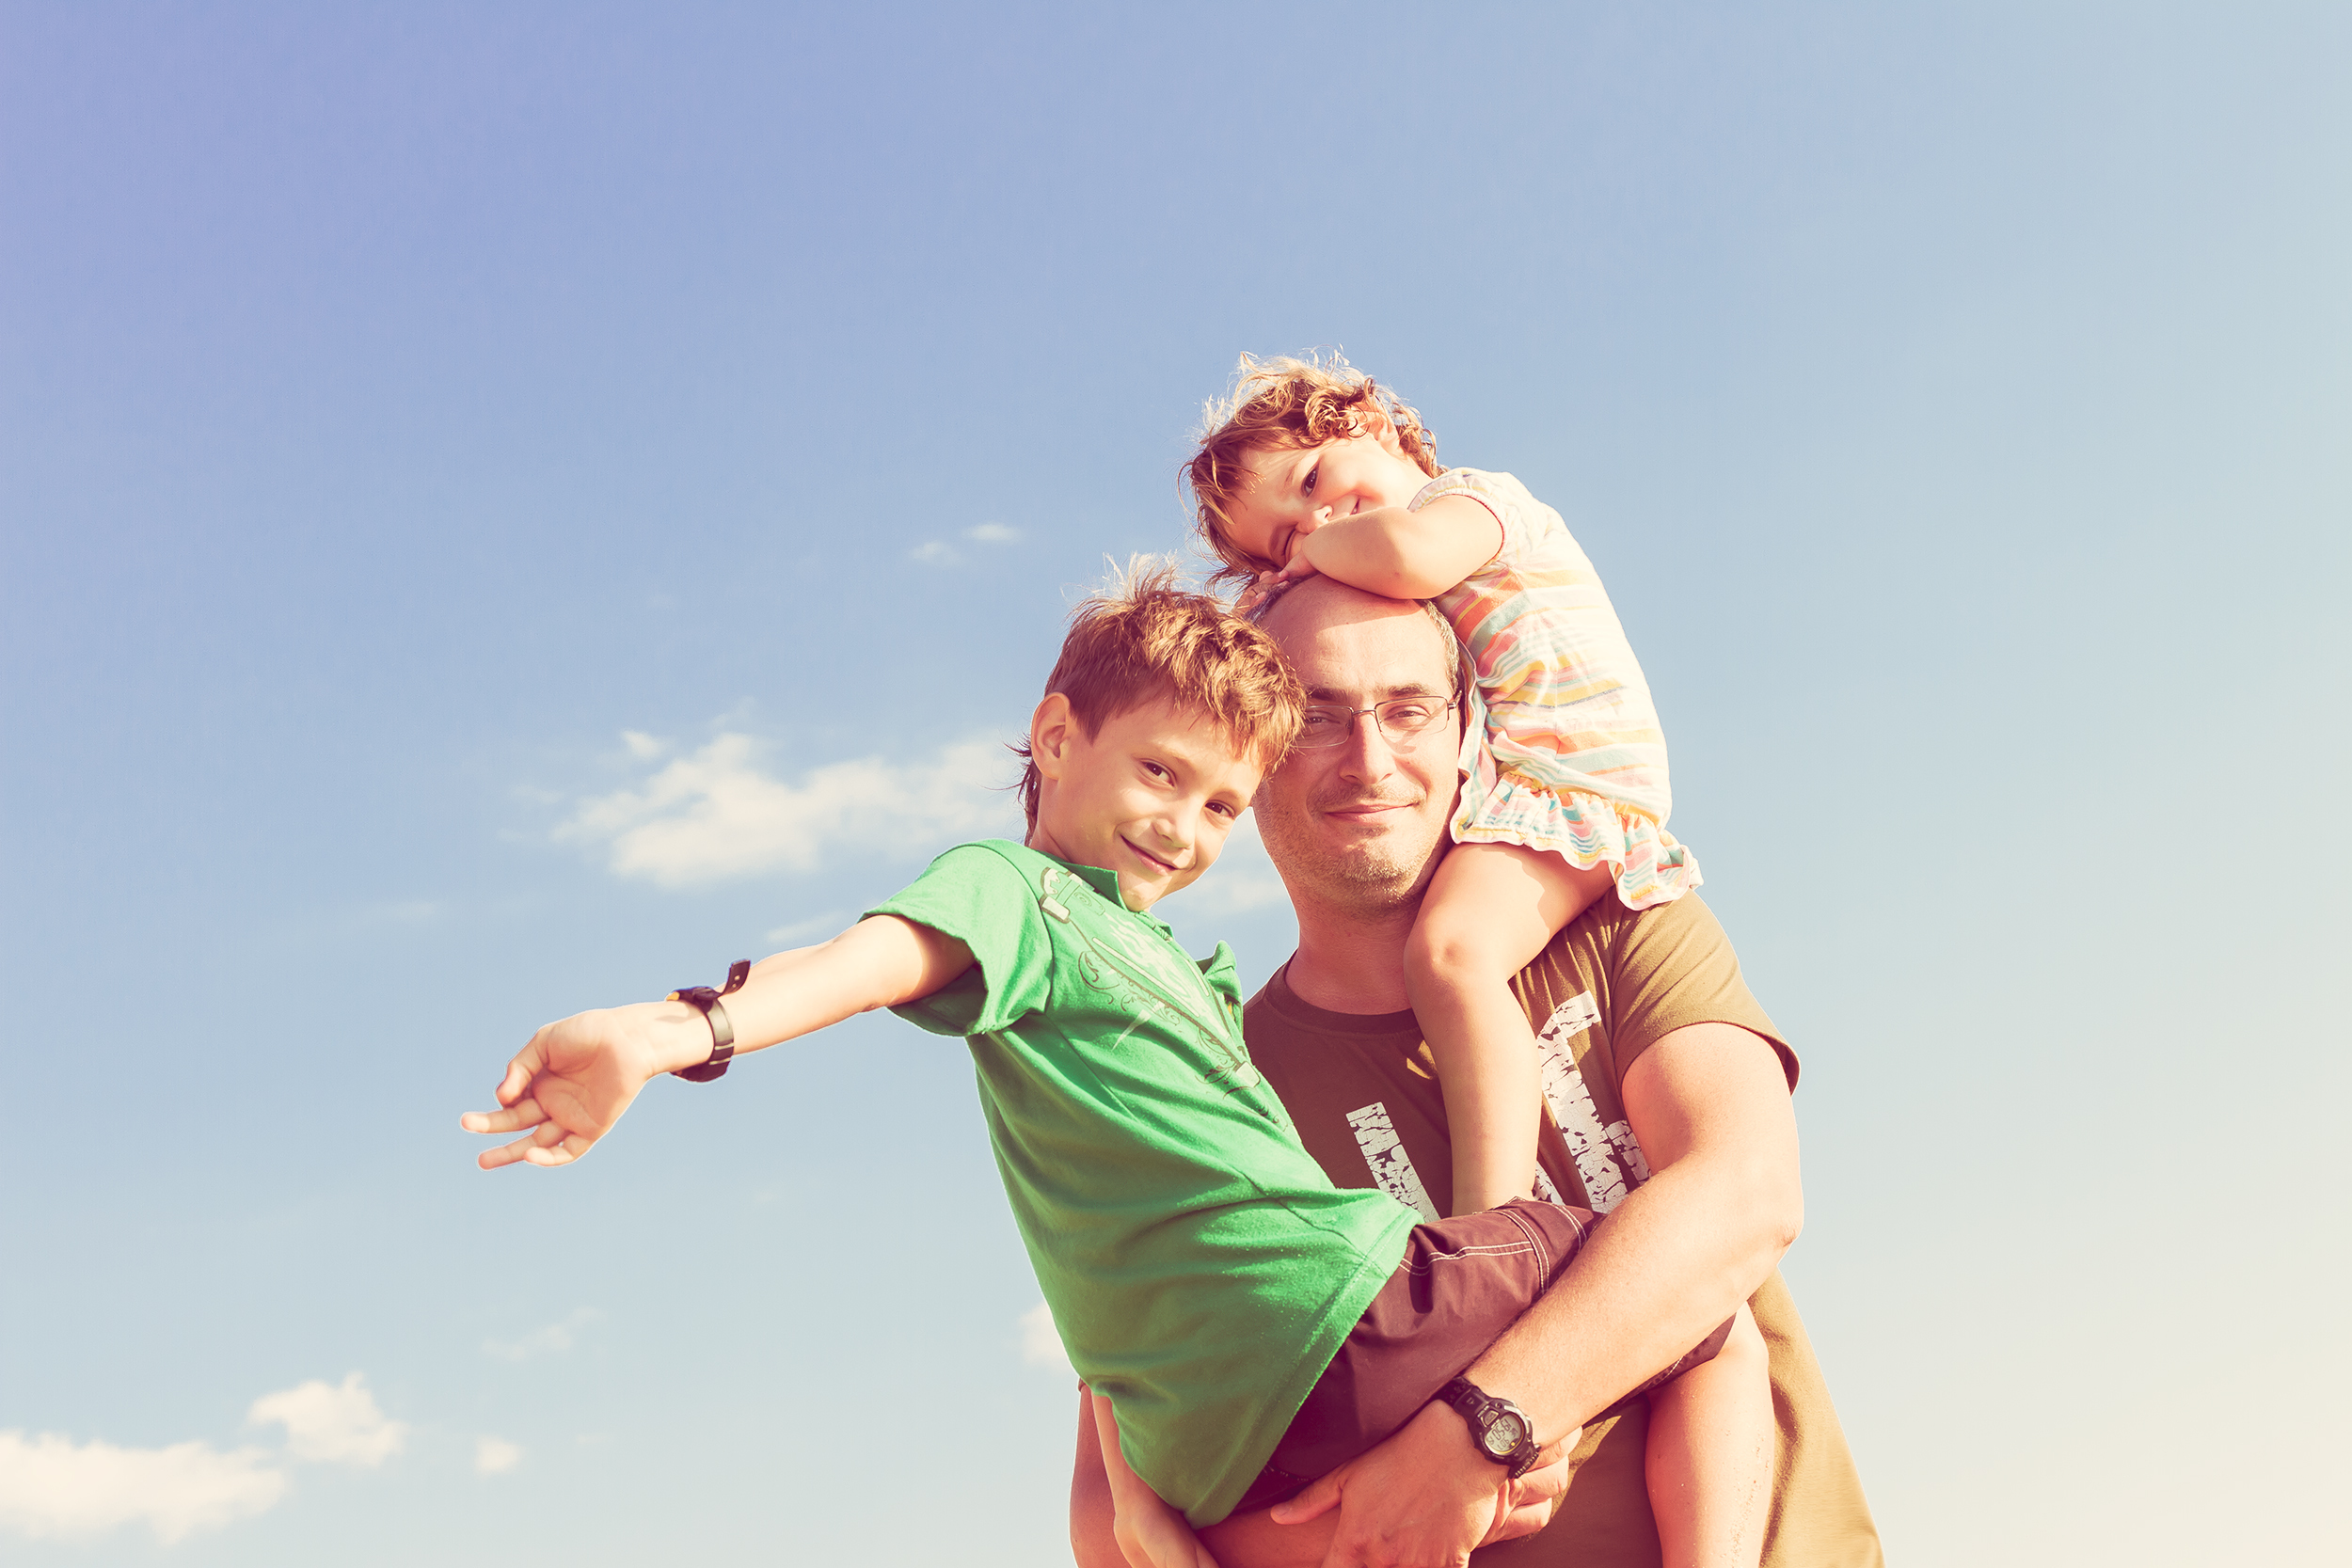 A father holding his son in his arms and his daughter on his shoulders | Source: Shutterstock